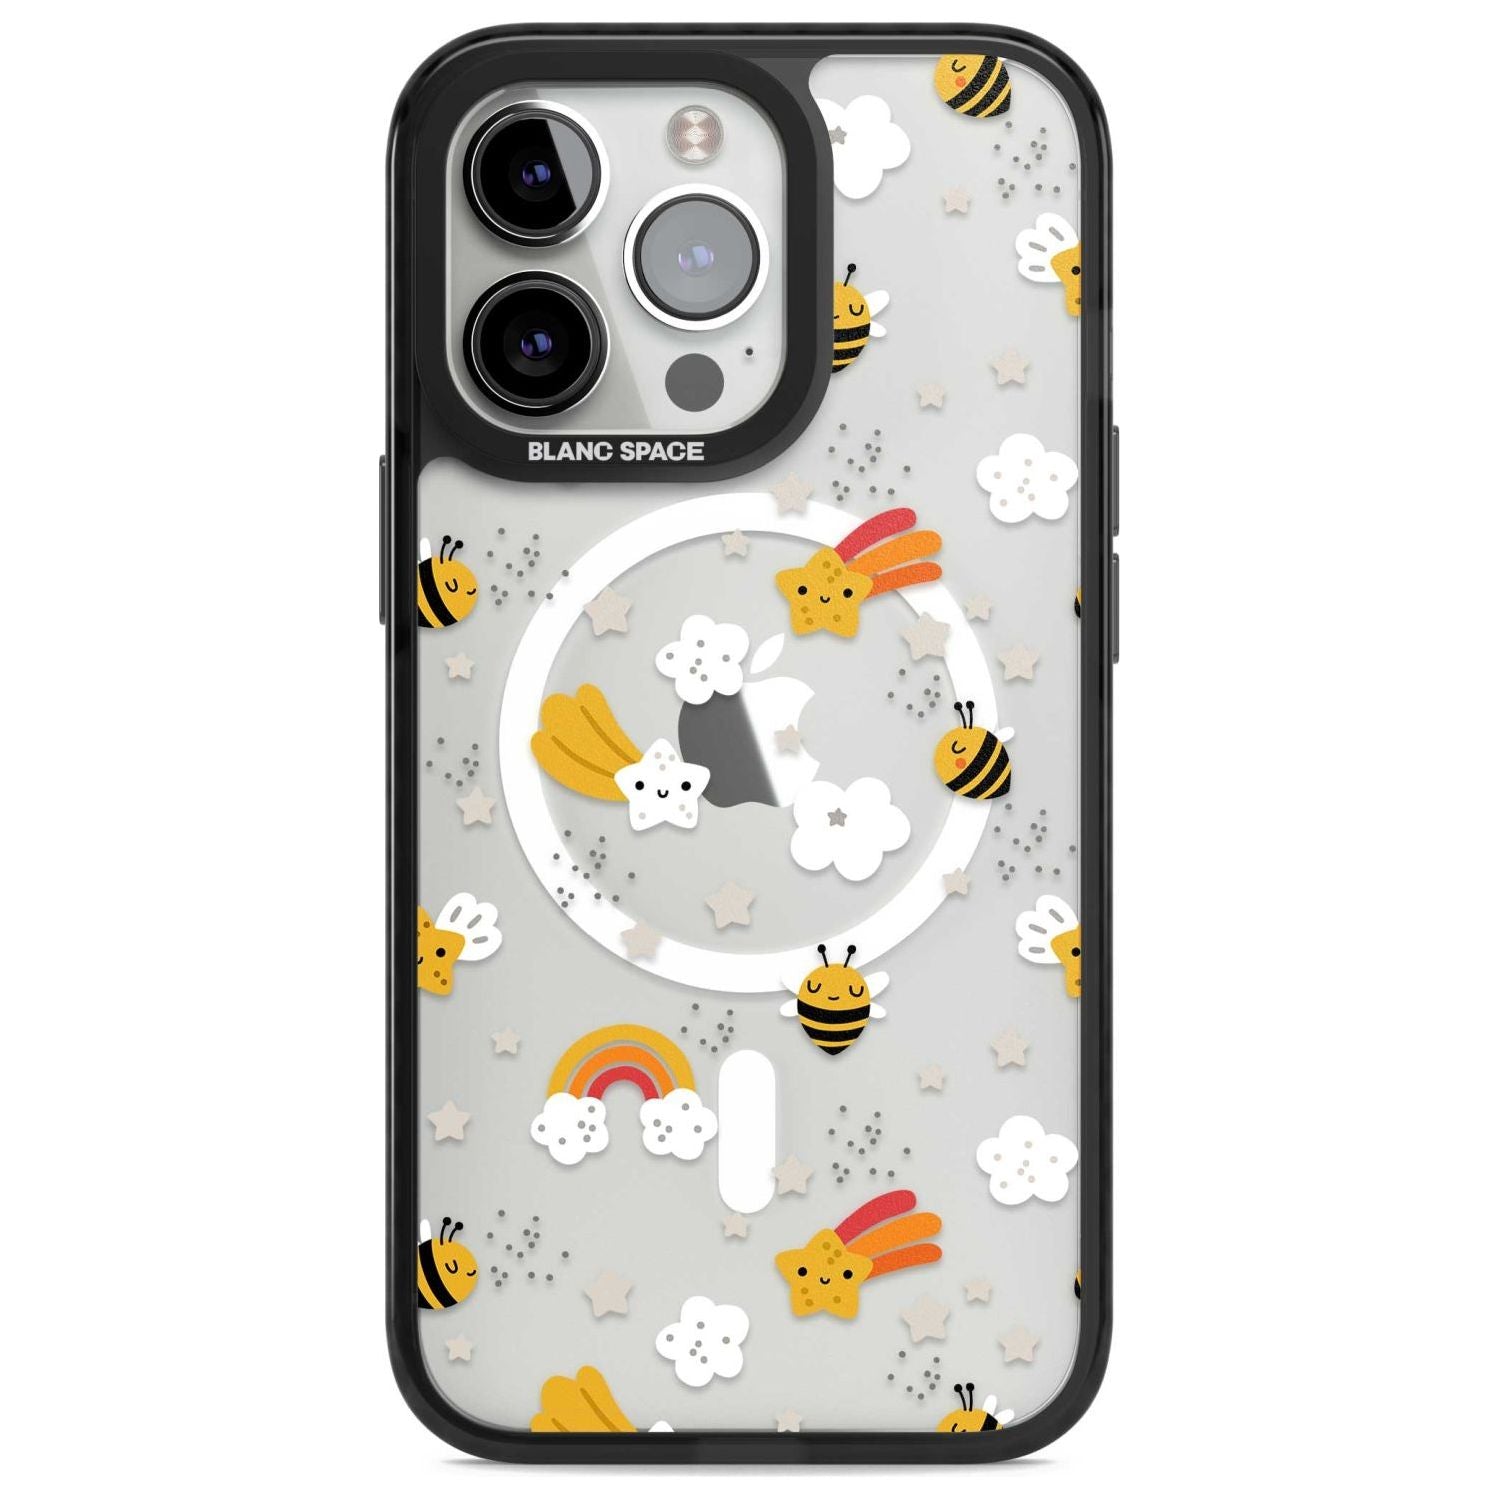 Busy Bee Phone Case iPhone 15 Pro Max / Magsafe Black Impact Case,iPhone 15 Pro / Magsafe Black Impact Case,iPhone 14 Pro Max / Magsafe Black Impact Case,iPhone 14 Pro / Magsafe Black Impact Case,iPhone 13 Pro / Magsafe Black Impact Case Blanc Space